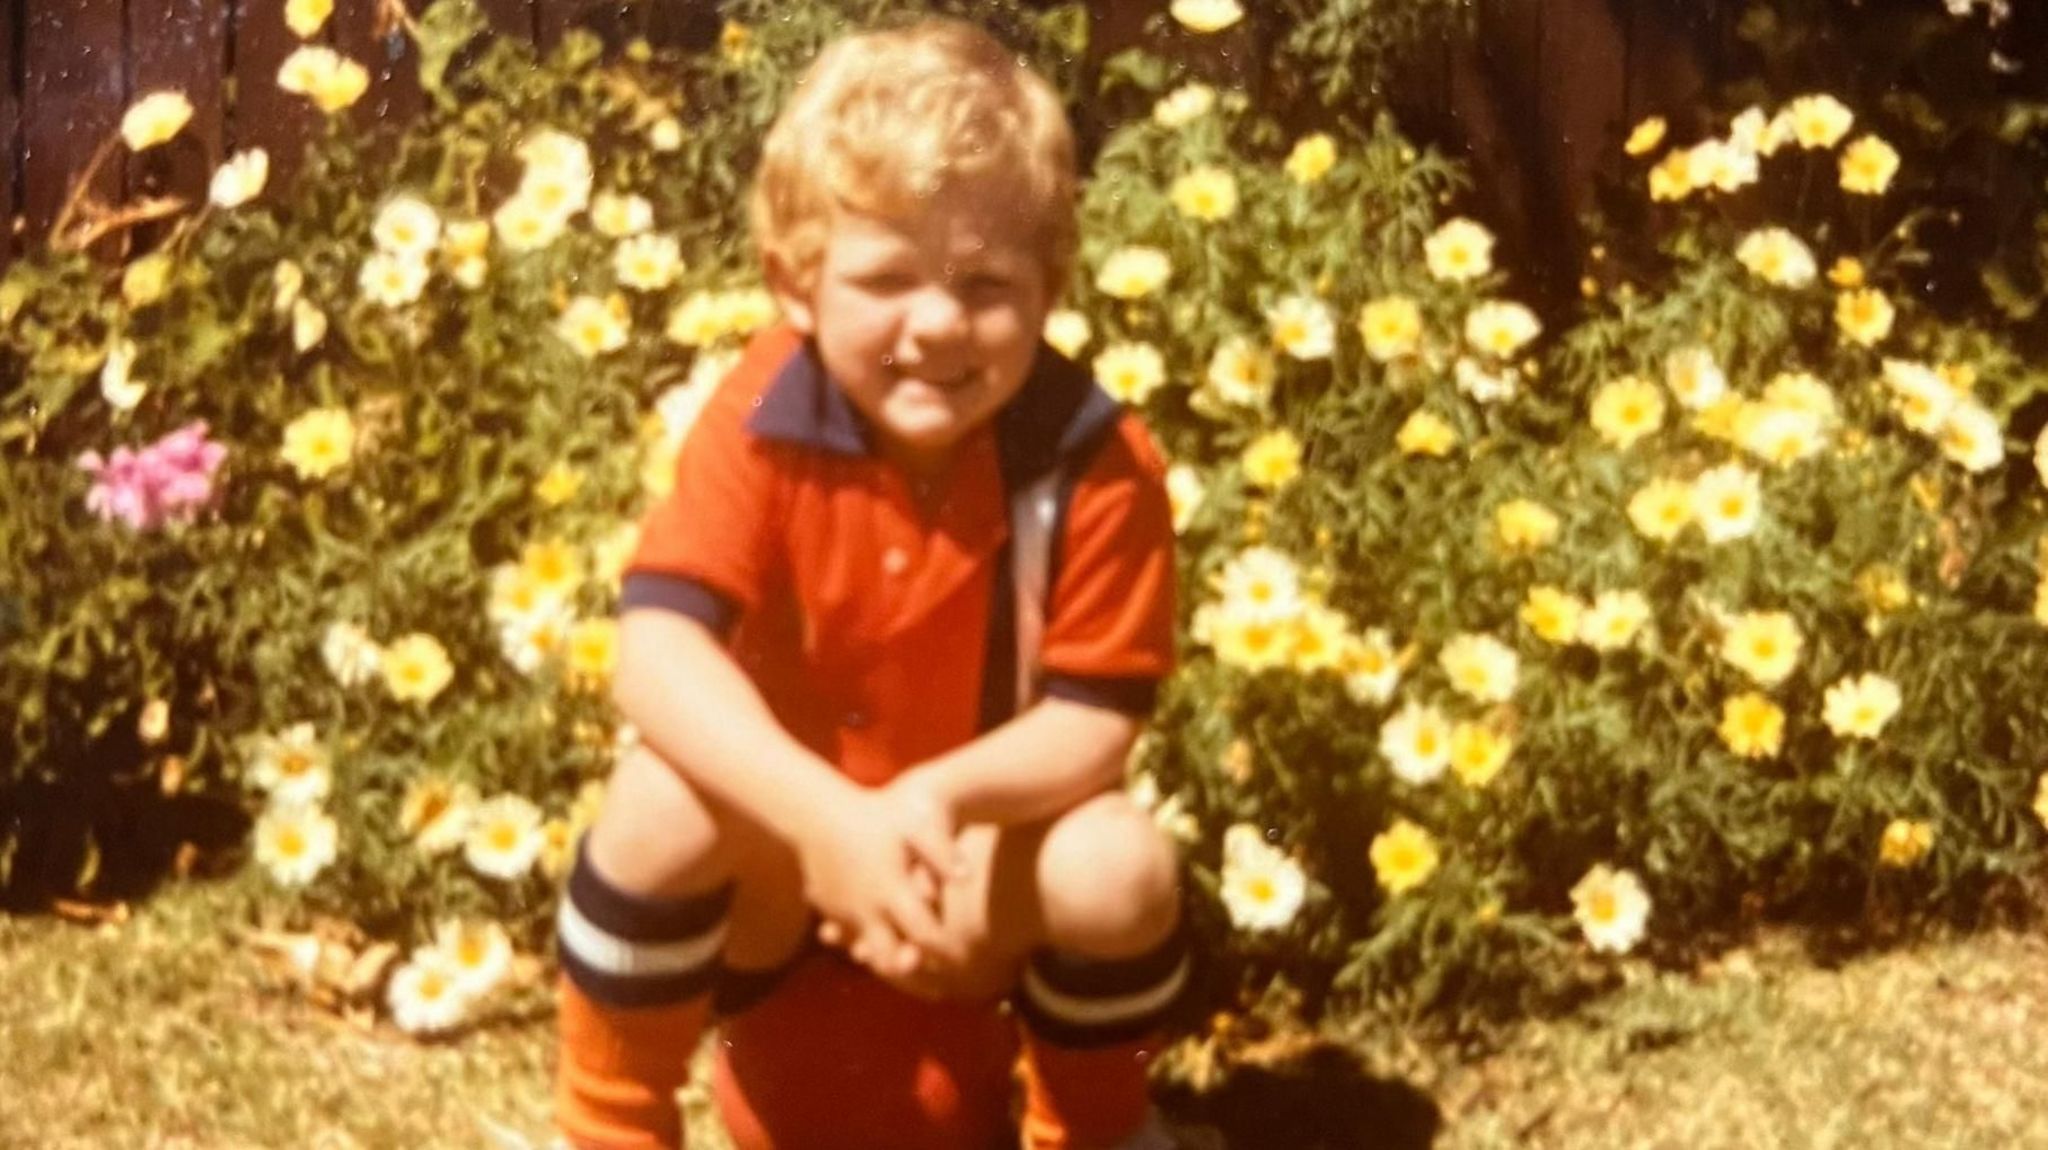 David Burton wearing a Luton kit as a child and sat on a football